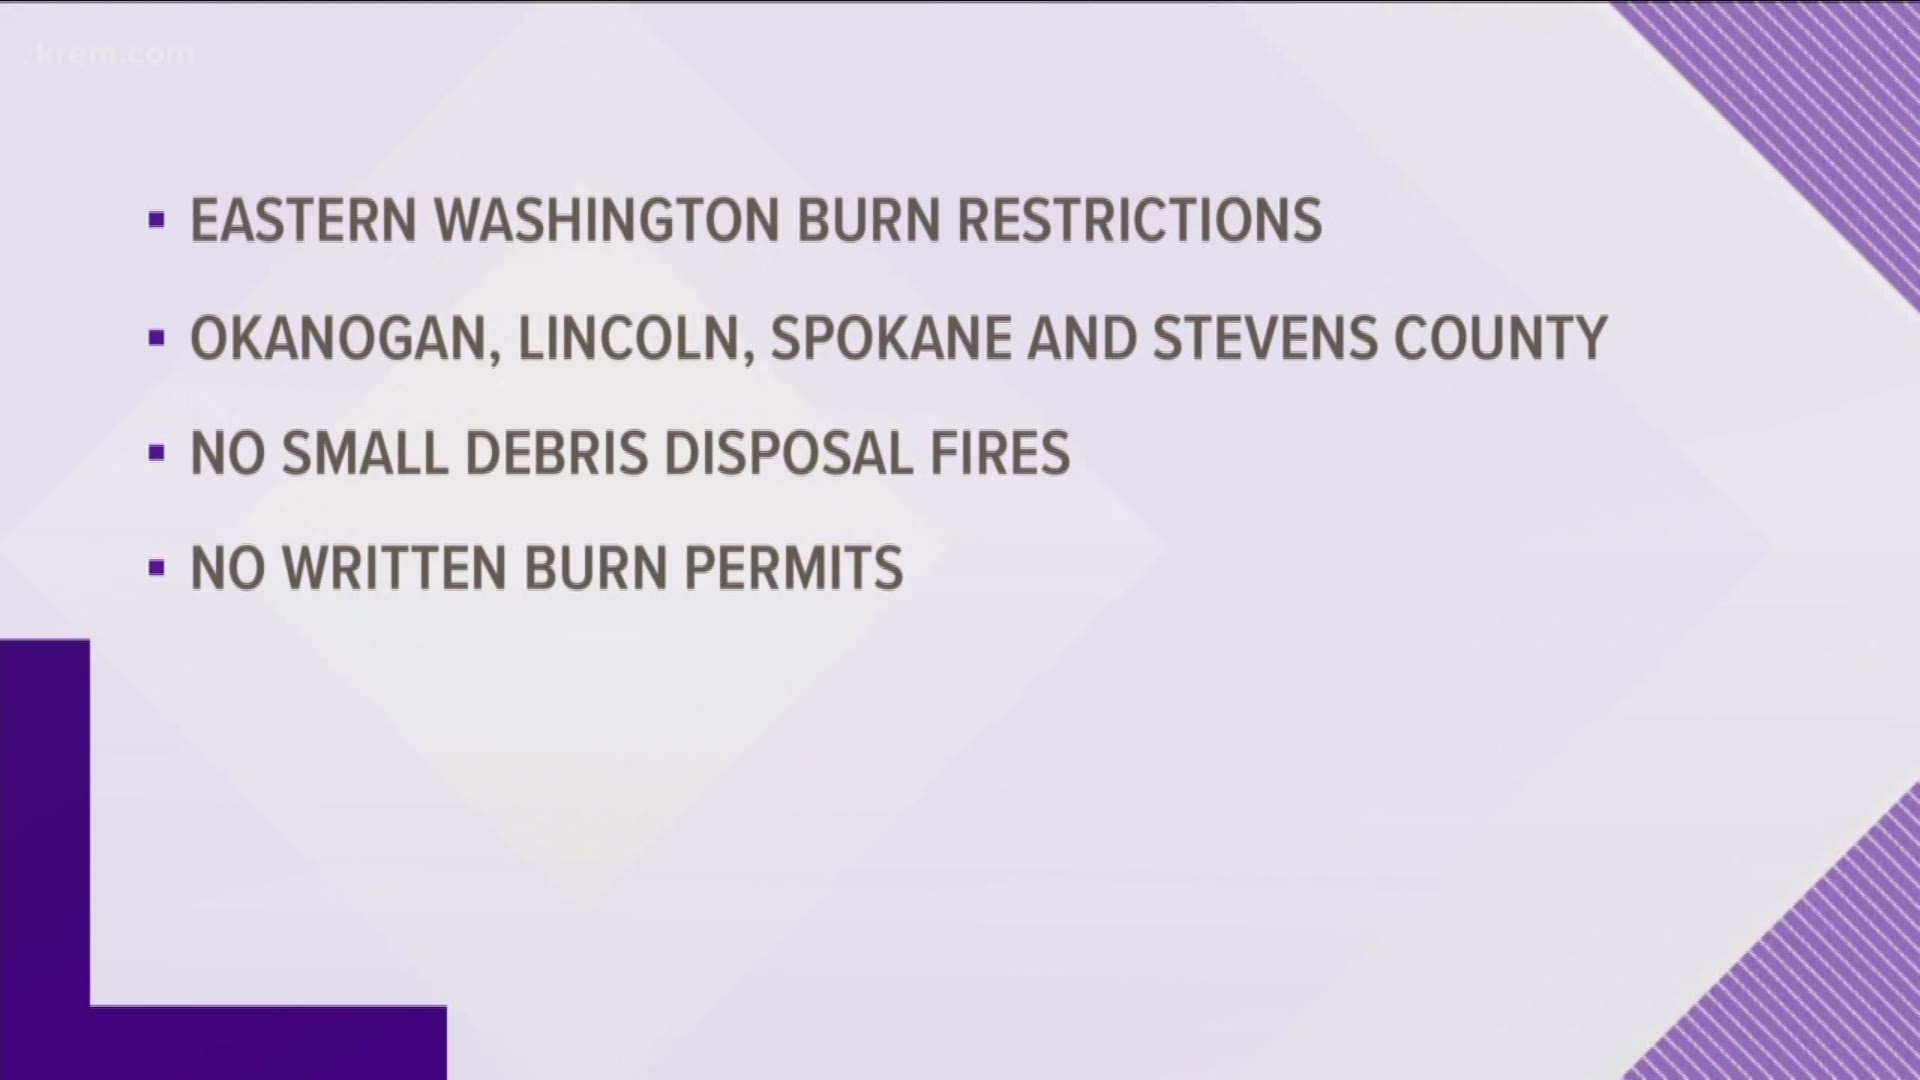 New fire restrictions go into effect on Friday, June 13, 2018.